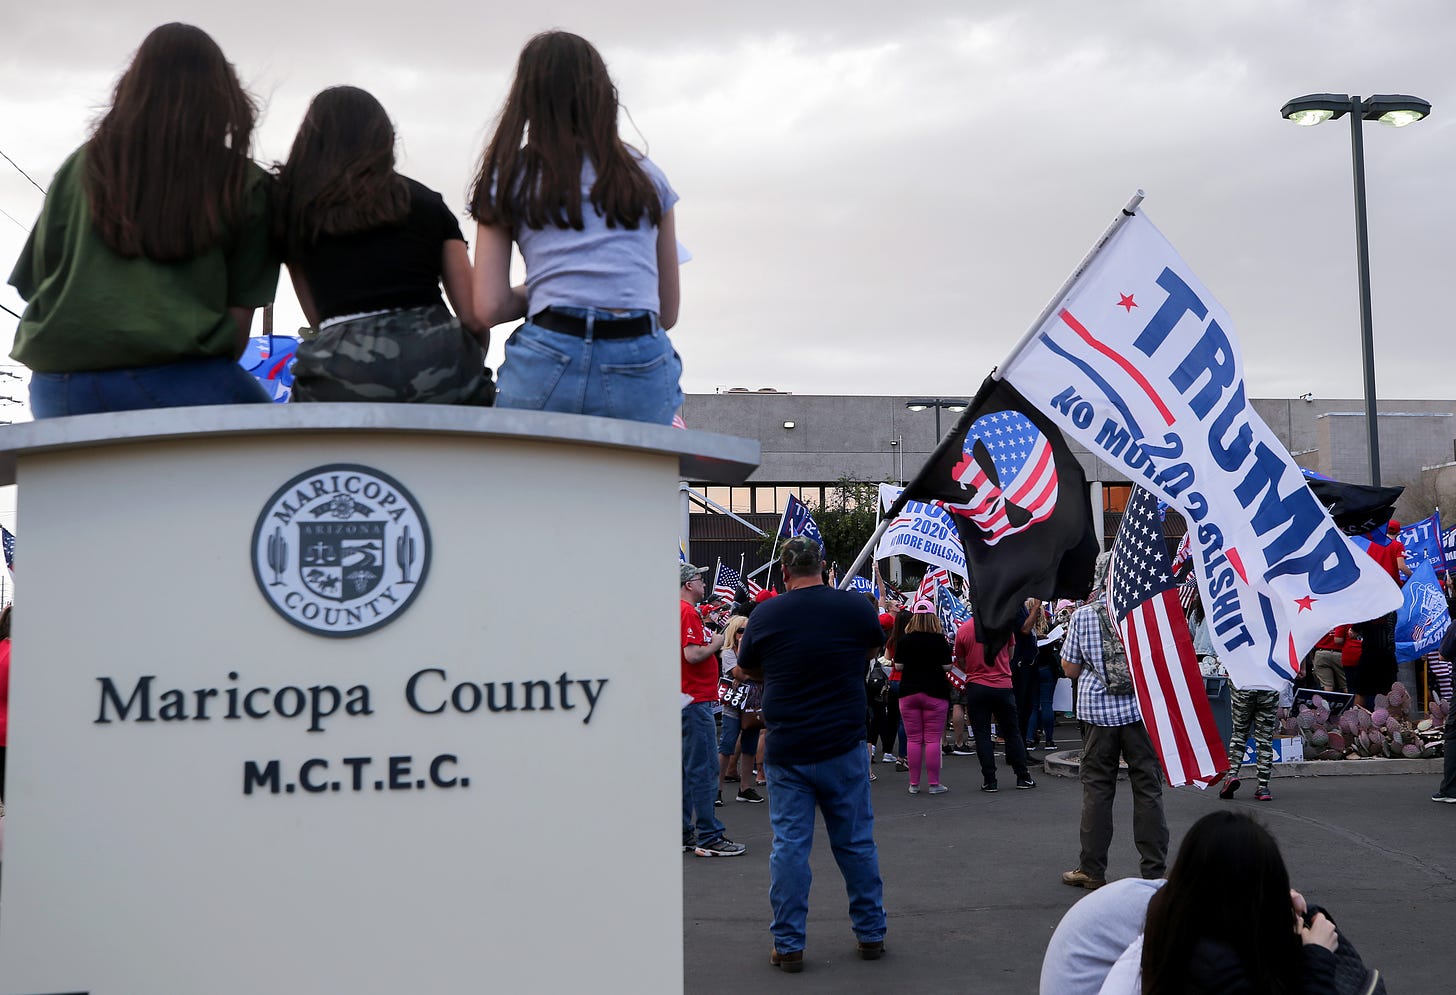 Supporters of Donald Trump demonstrate in front of the Maricopa County Elections Department office on November 7, 2020 in Phoenix, Arizona. (Photo by Mario Tama/Getty Images)